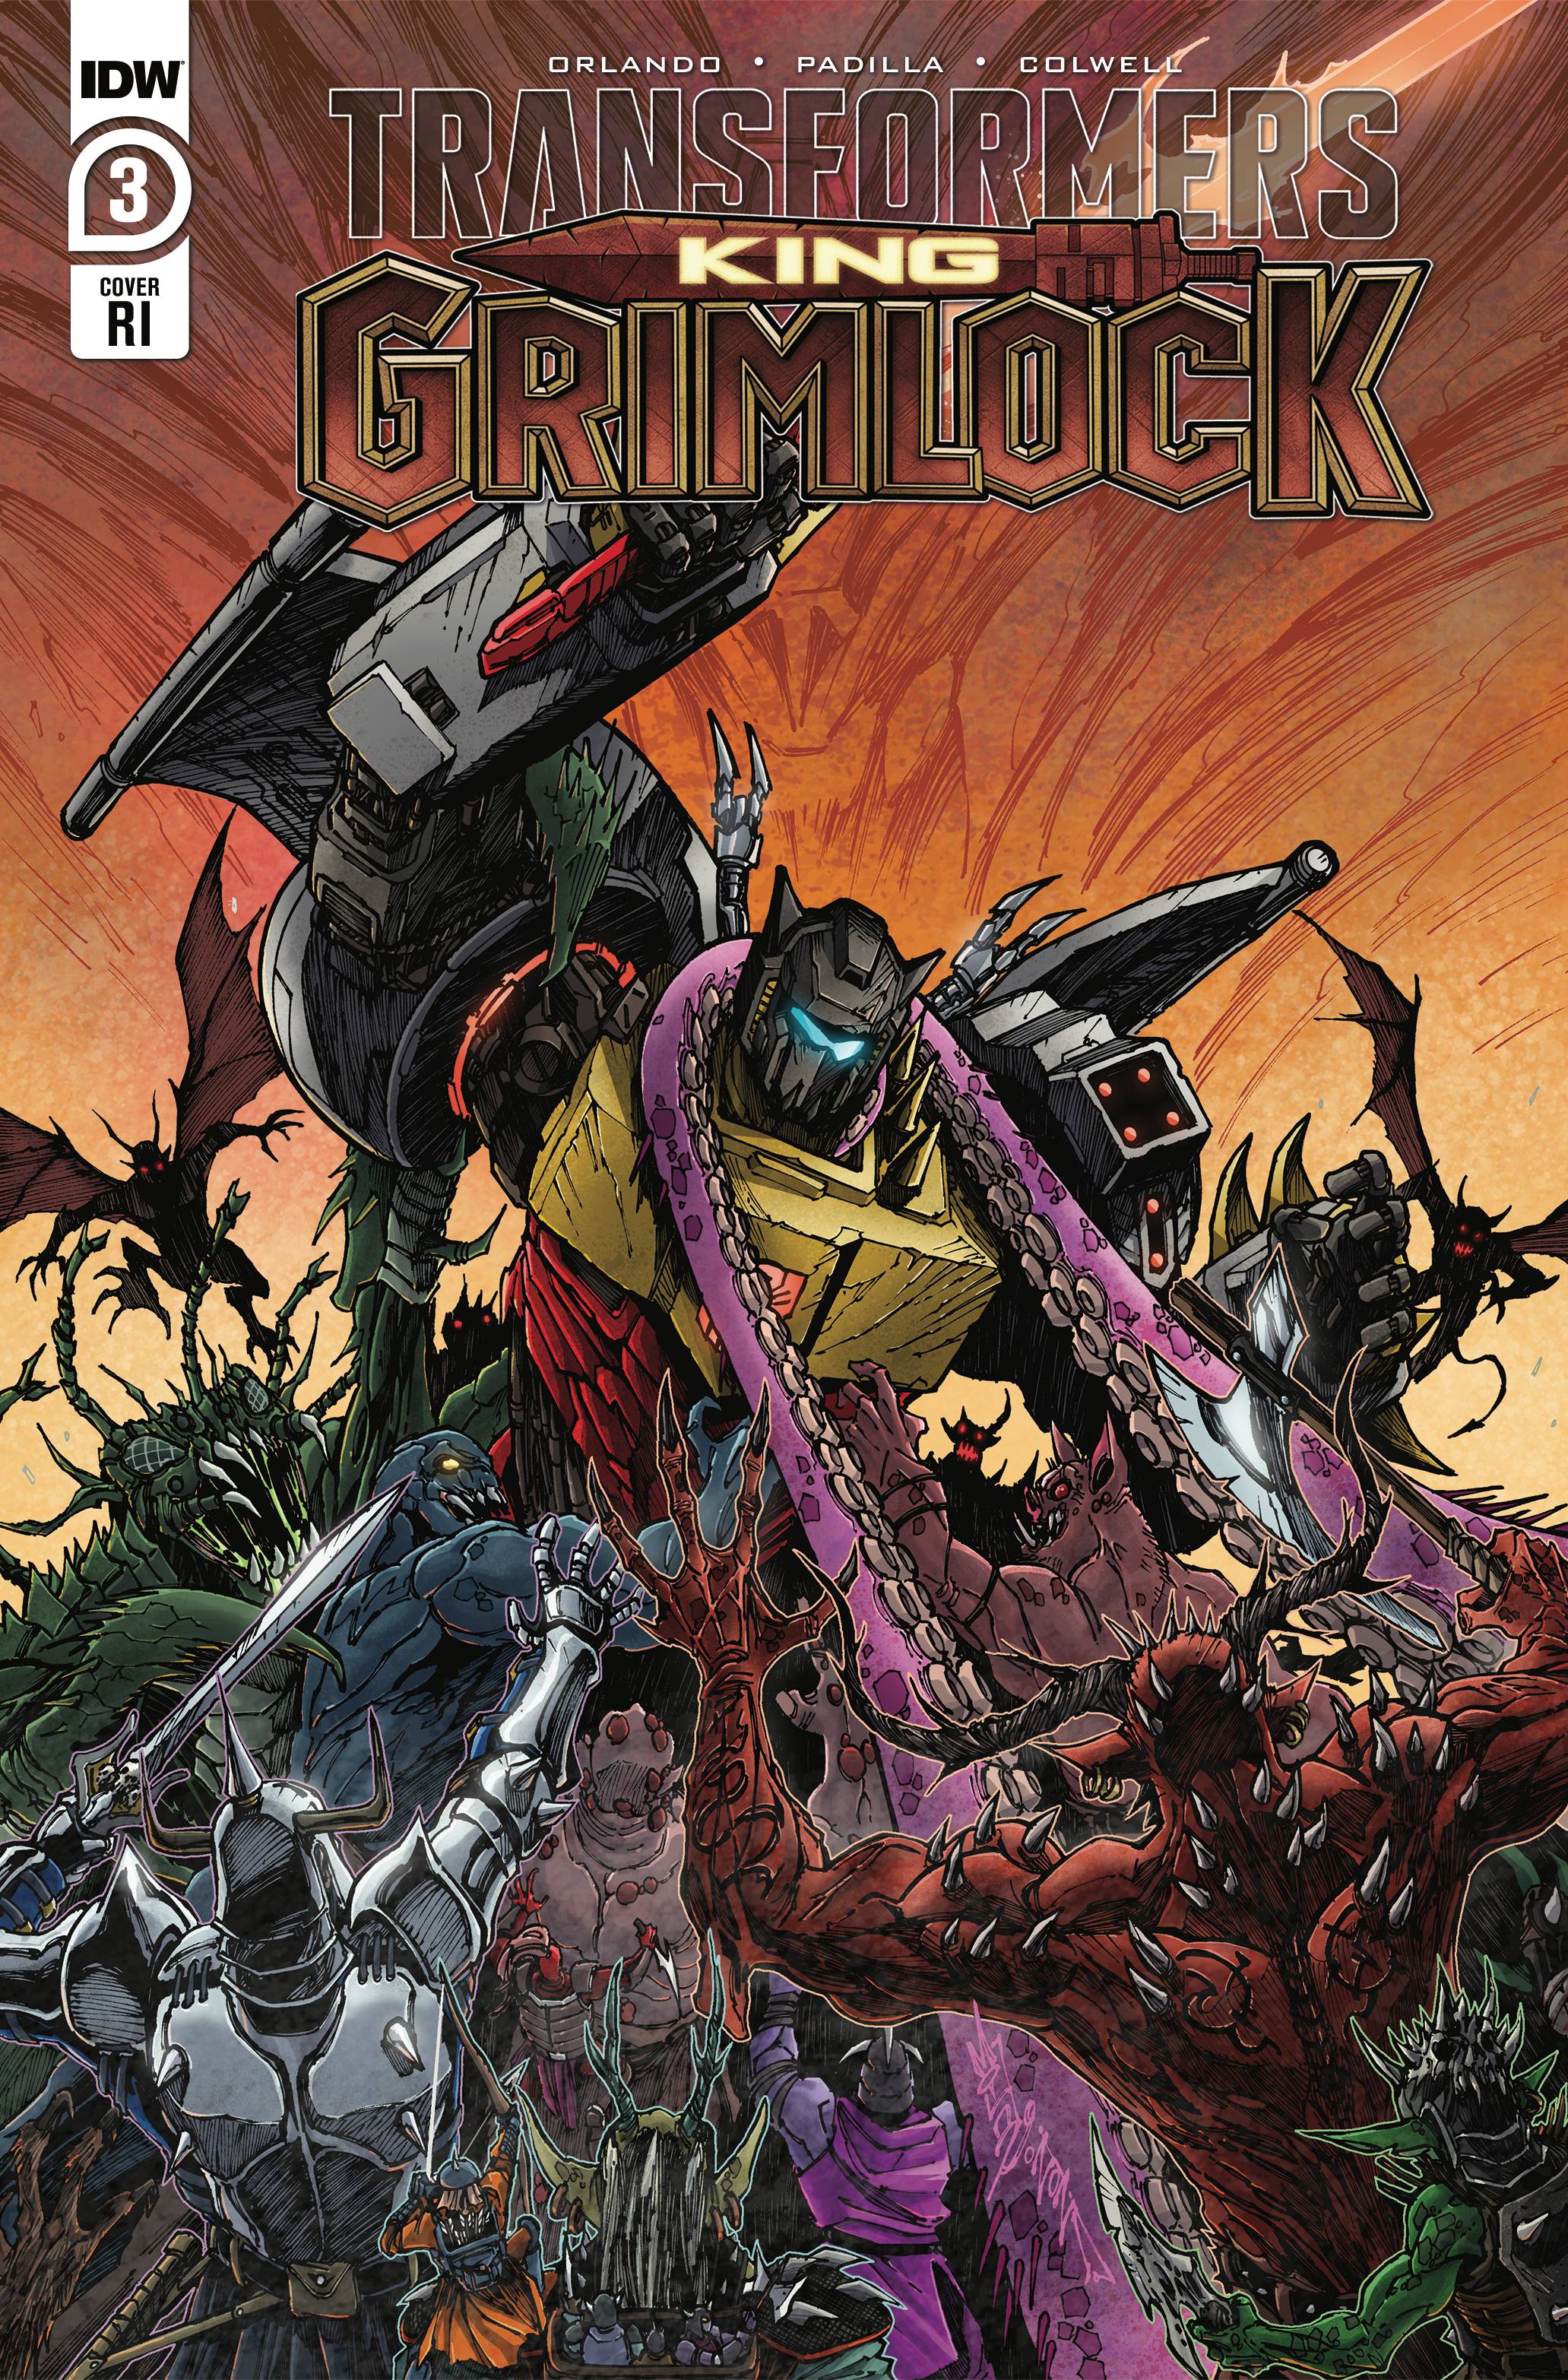 Transformers King Grimlock #3Cover C 10 Cpy Incentive Milne (of 5)